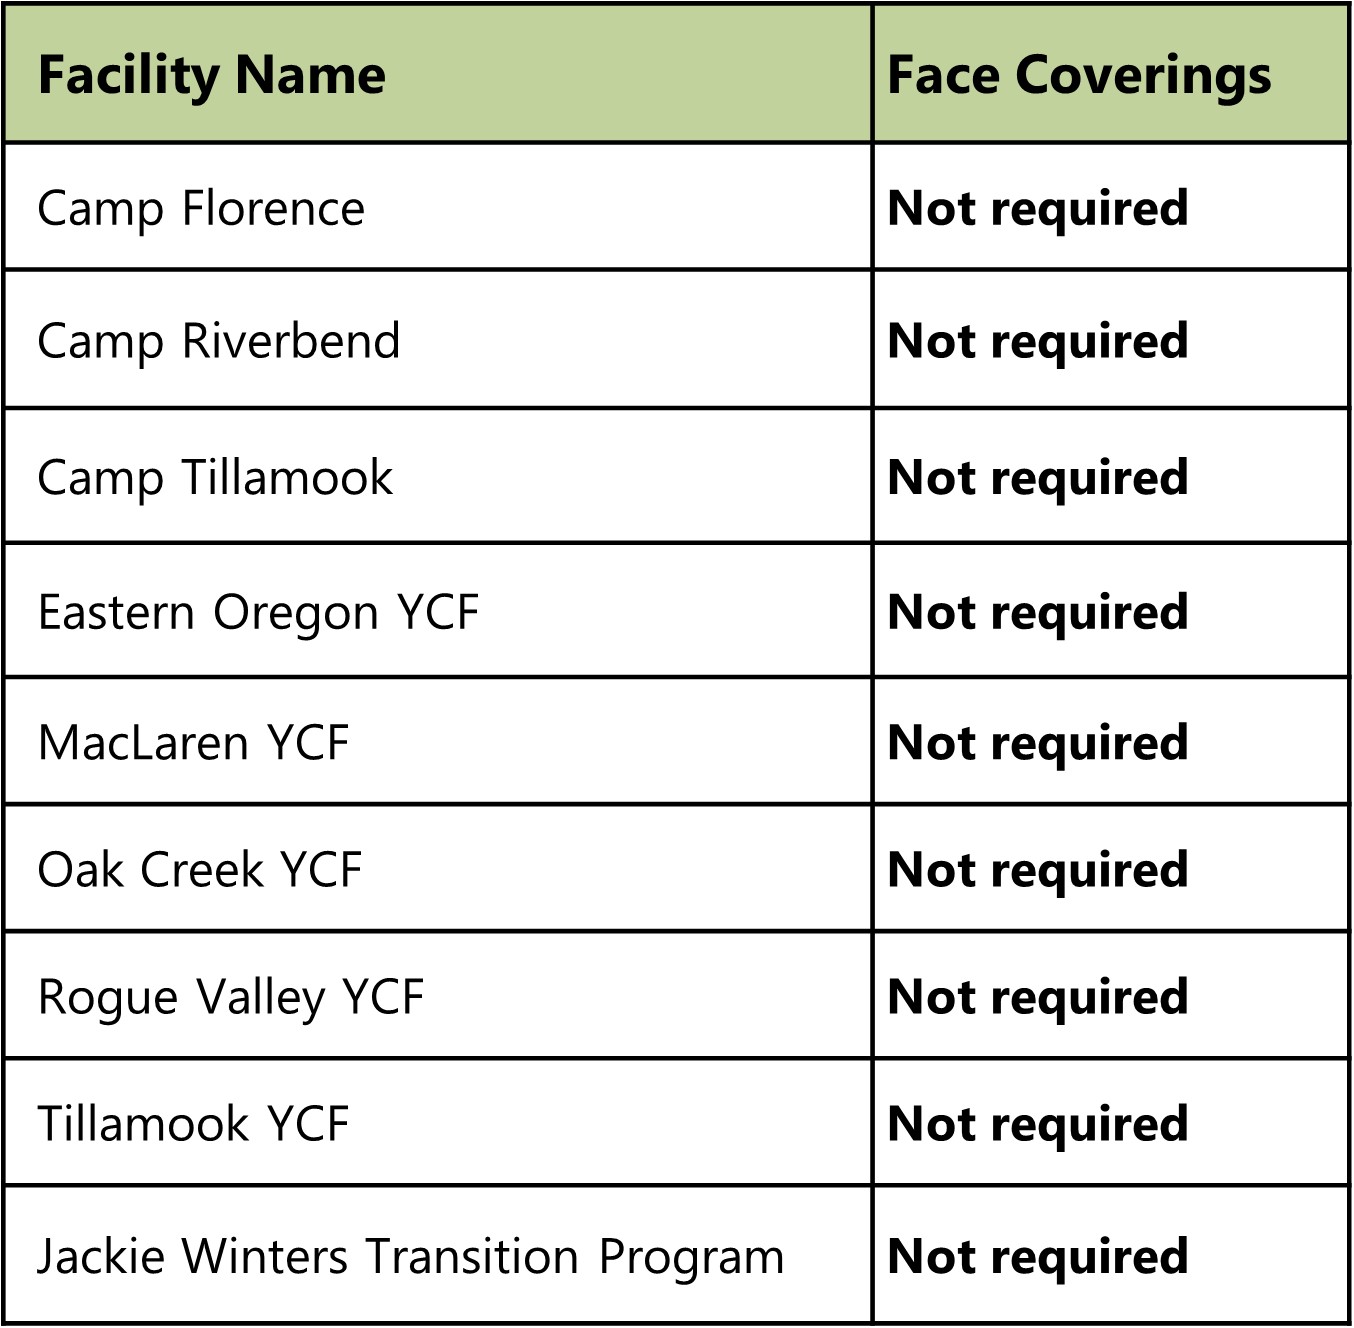 Chart showing each facility and whether face coverings are required